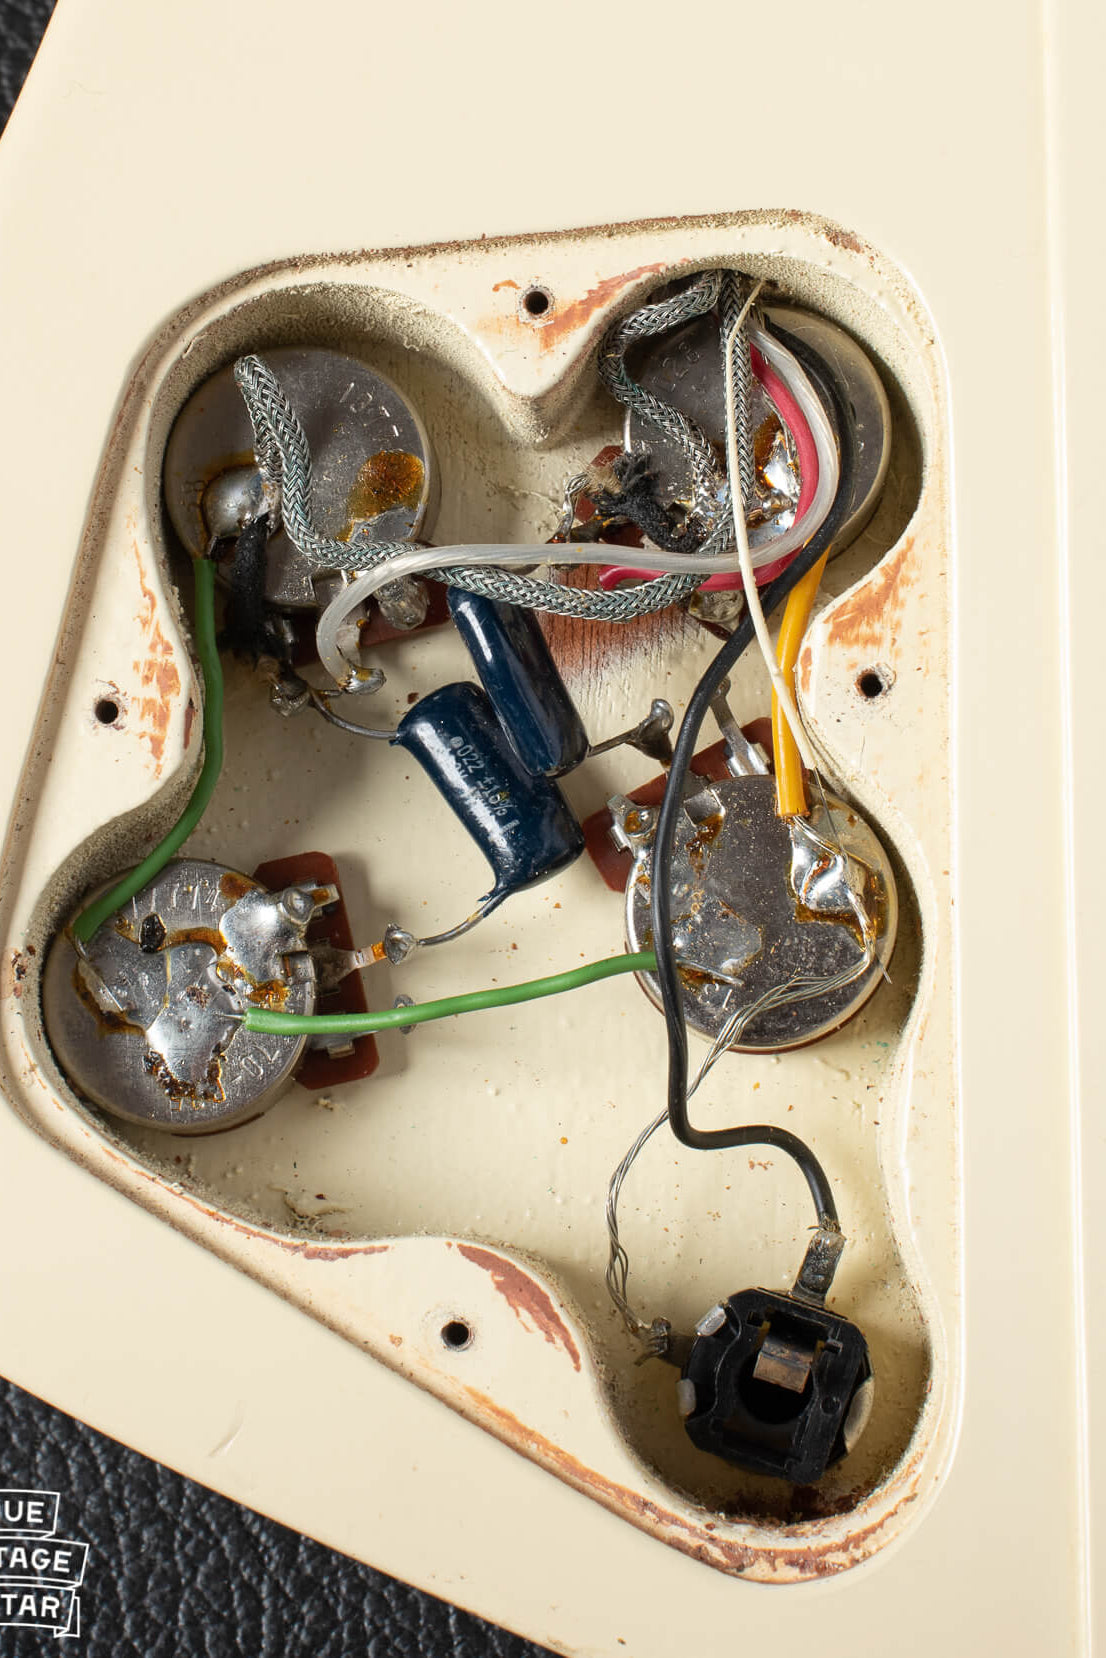 Control cavity with potentiometer codes on Gibson Firebird 76 White 1977